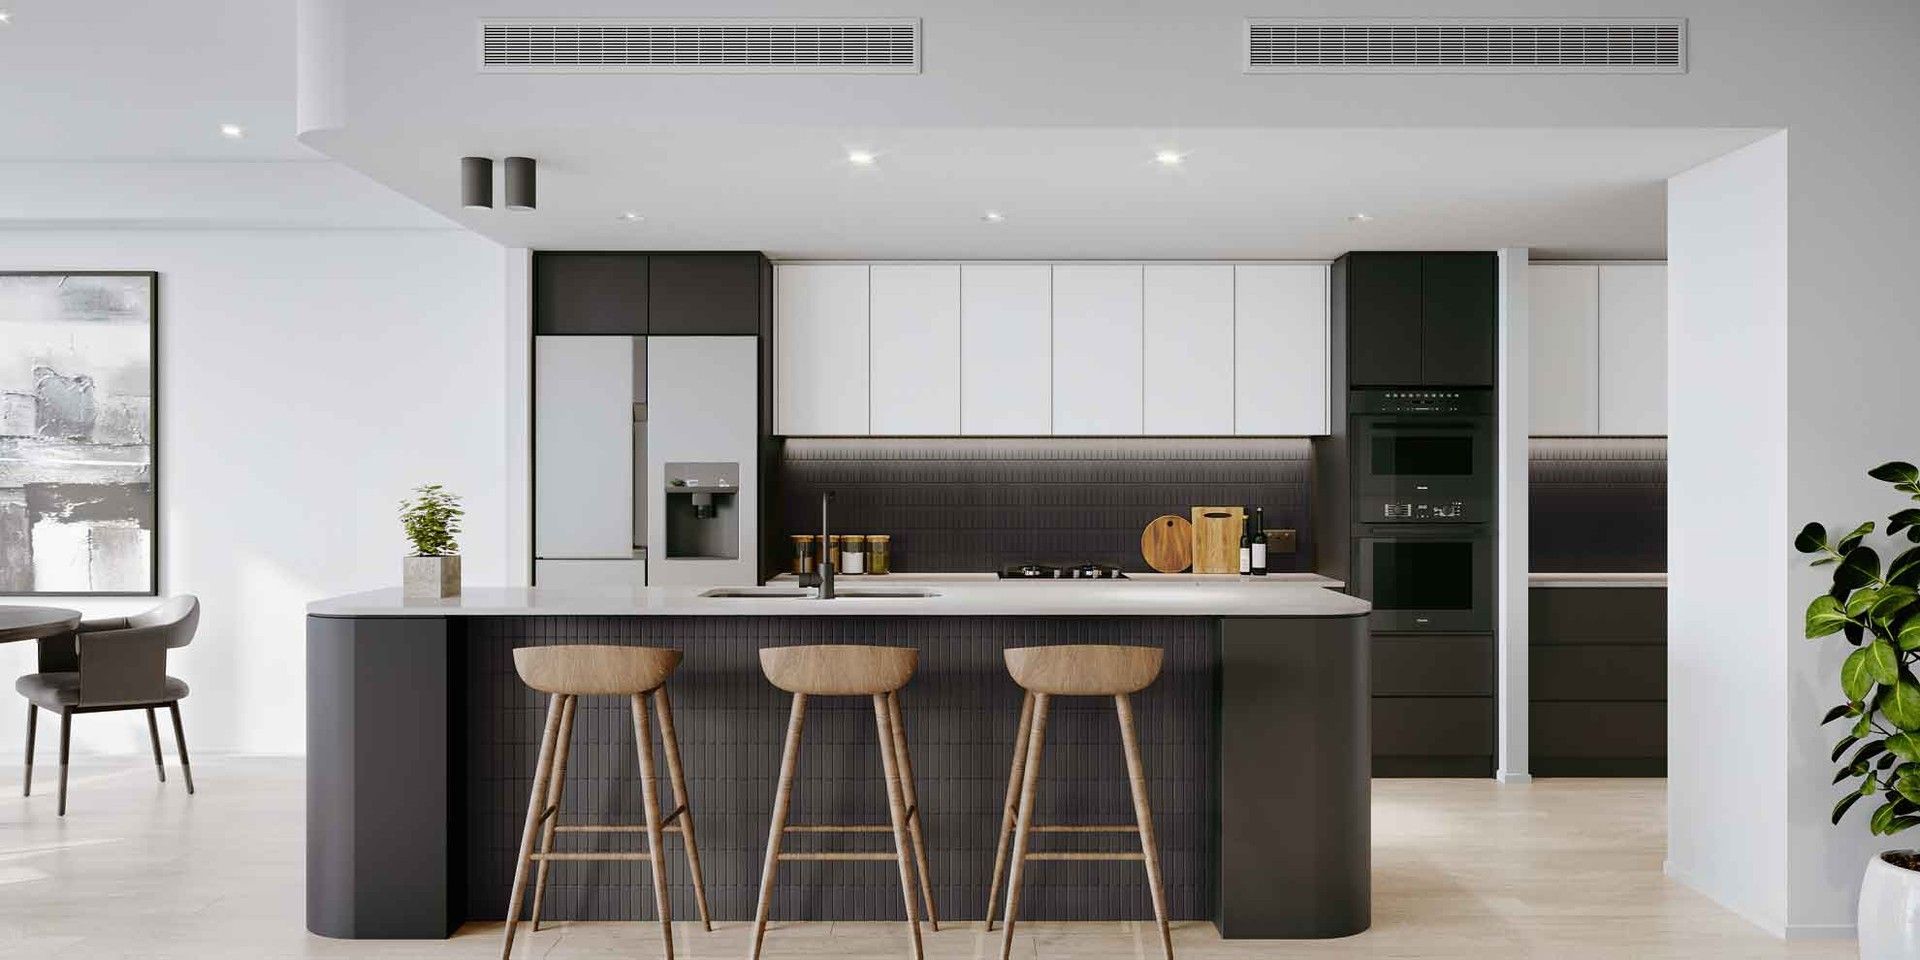 3 bedrooms New Apartments / Off the Plan in 1604/10 Flora Street STONES CORNER QLD, 4120